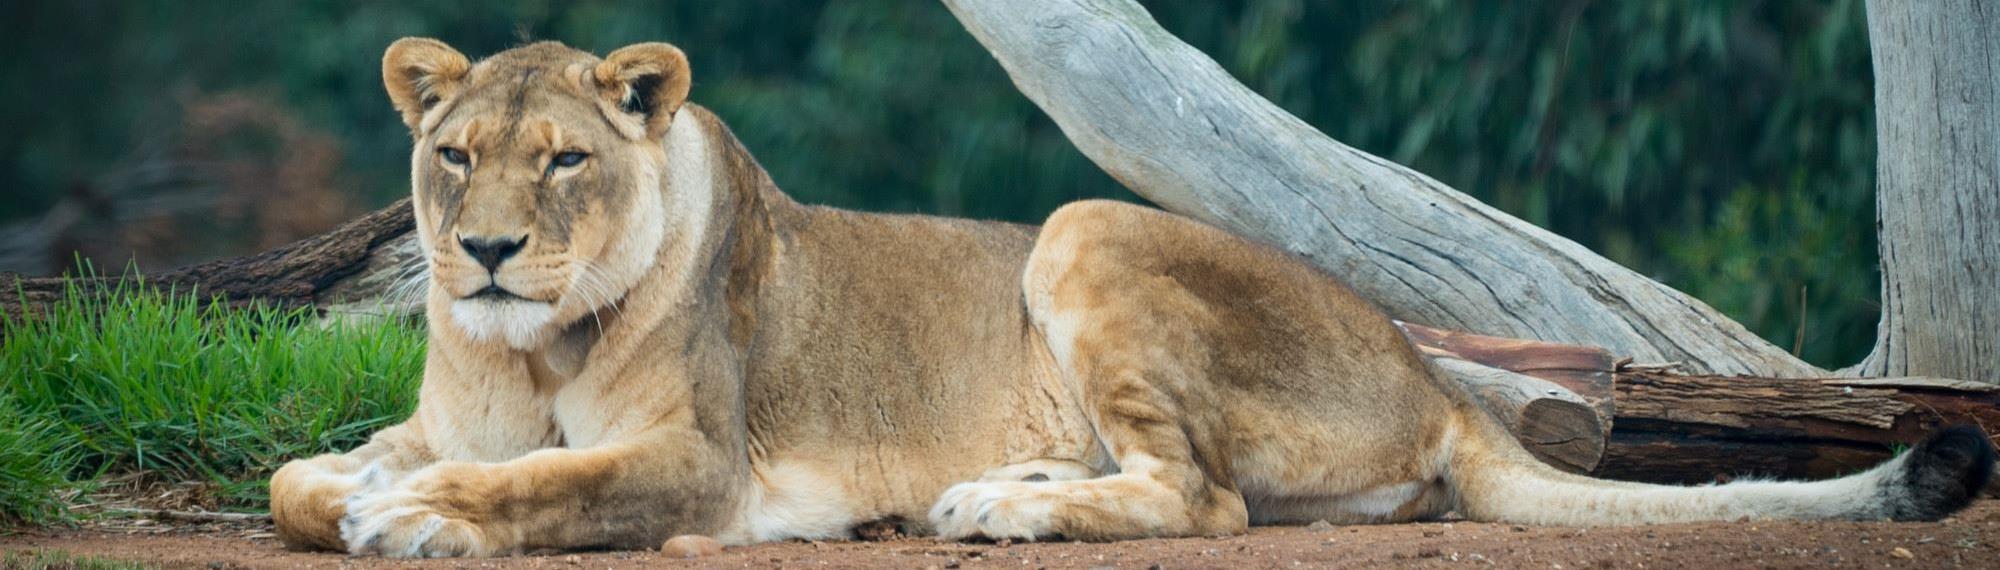 Jarrah the lioness laying down and resting beneath tree in her enclosure. She is gazing into the distance.